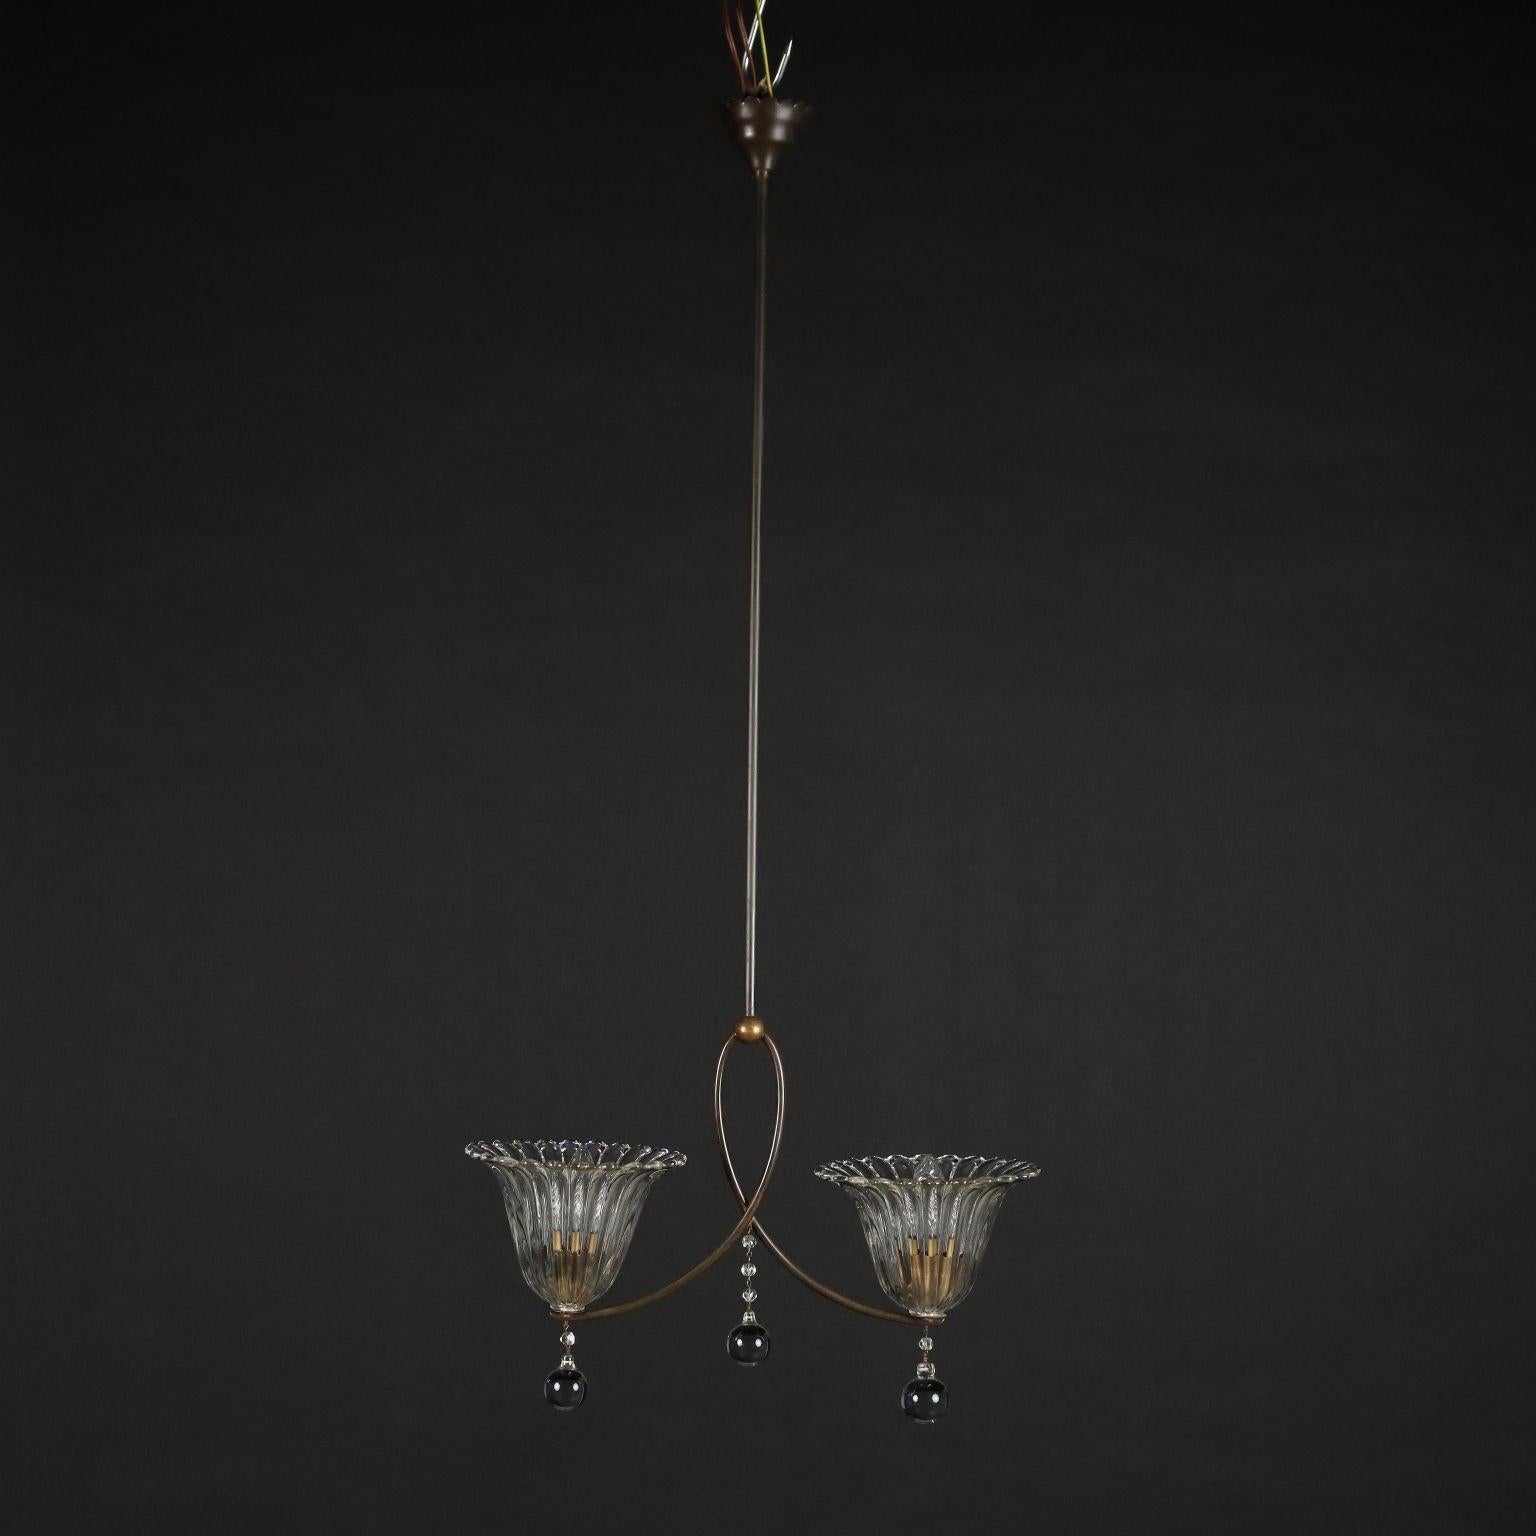 Ceiling lamp; brass and glass.